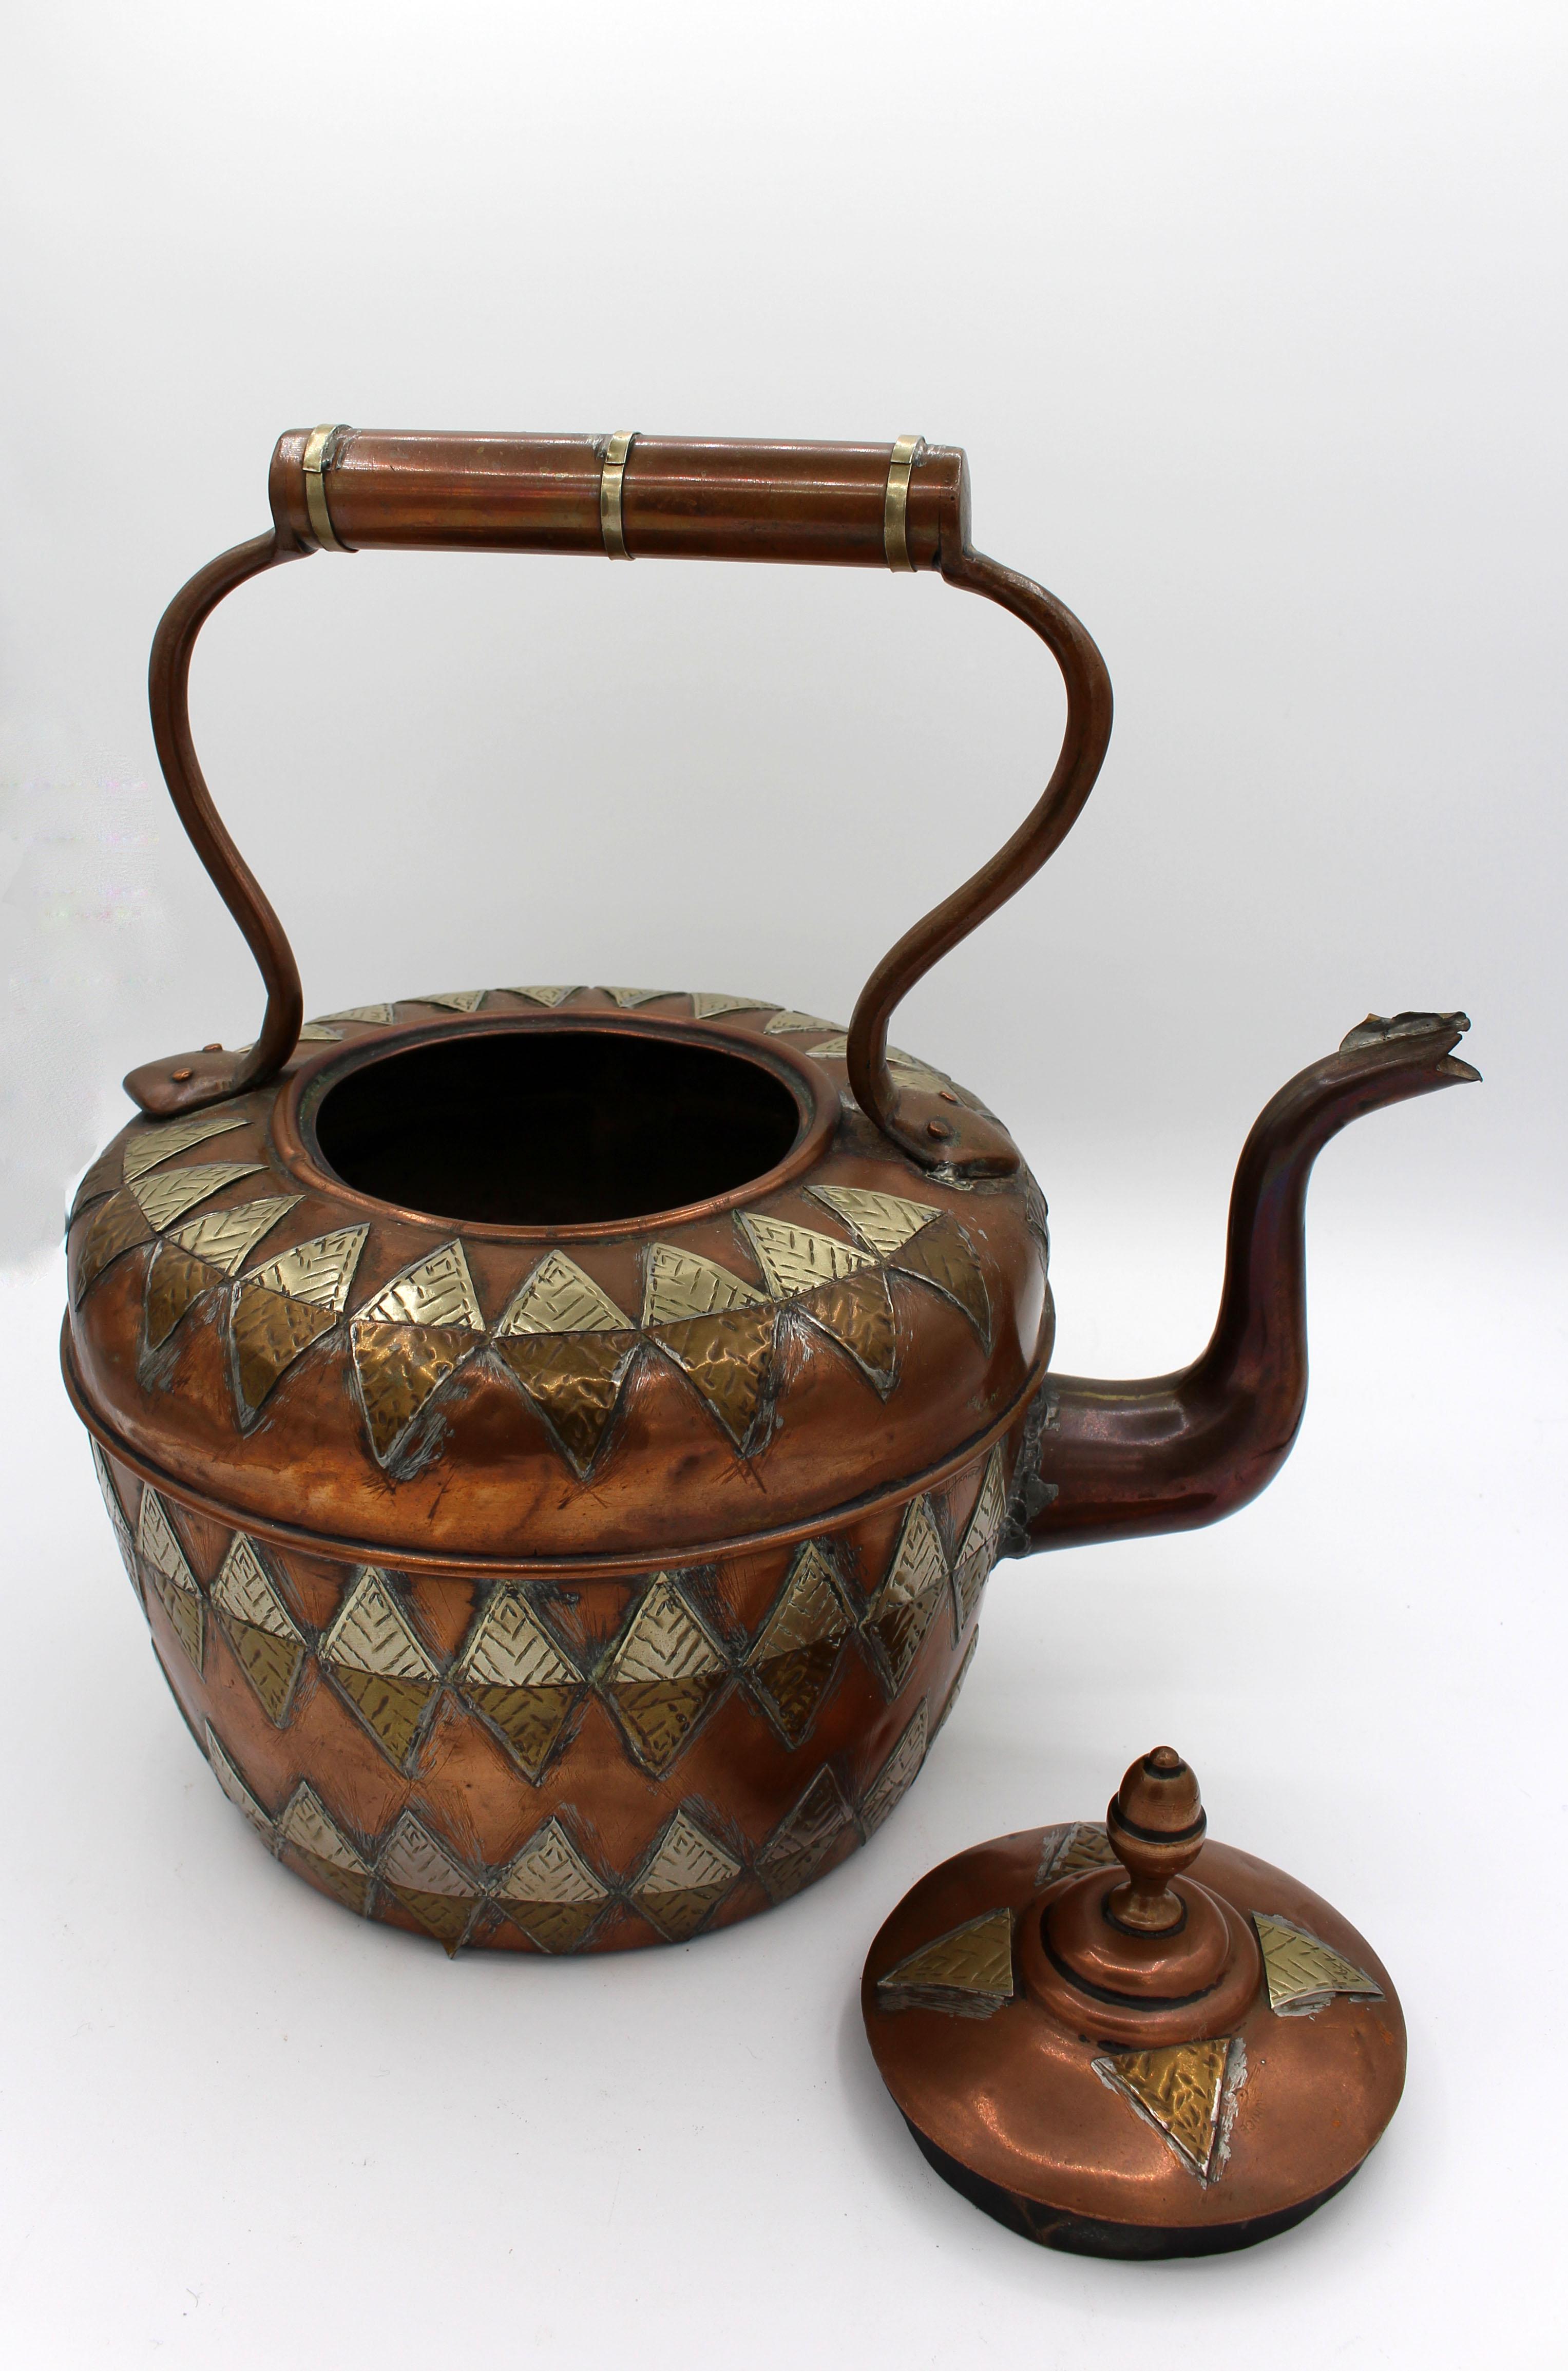 A grand copper Raj Period tea kettle in Anglo-Indian Taste with cut-work decorative overlays of brass. Old spout repair. Late 19th century.

We have been a major source for the selective buyer for over 90 years. Whitehall is one the finest